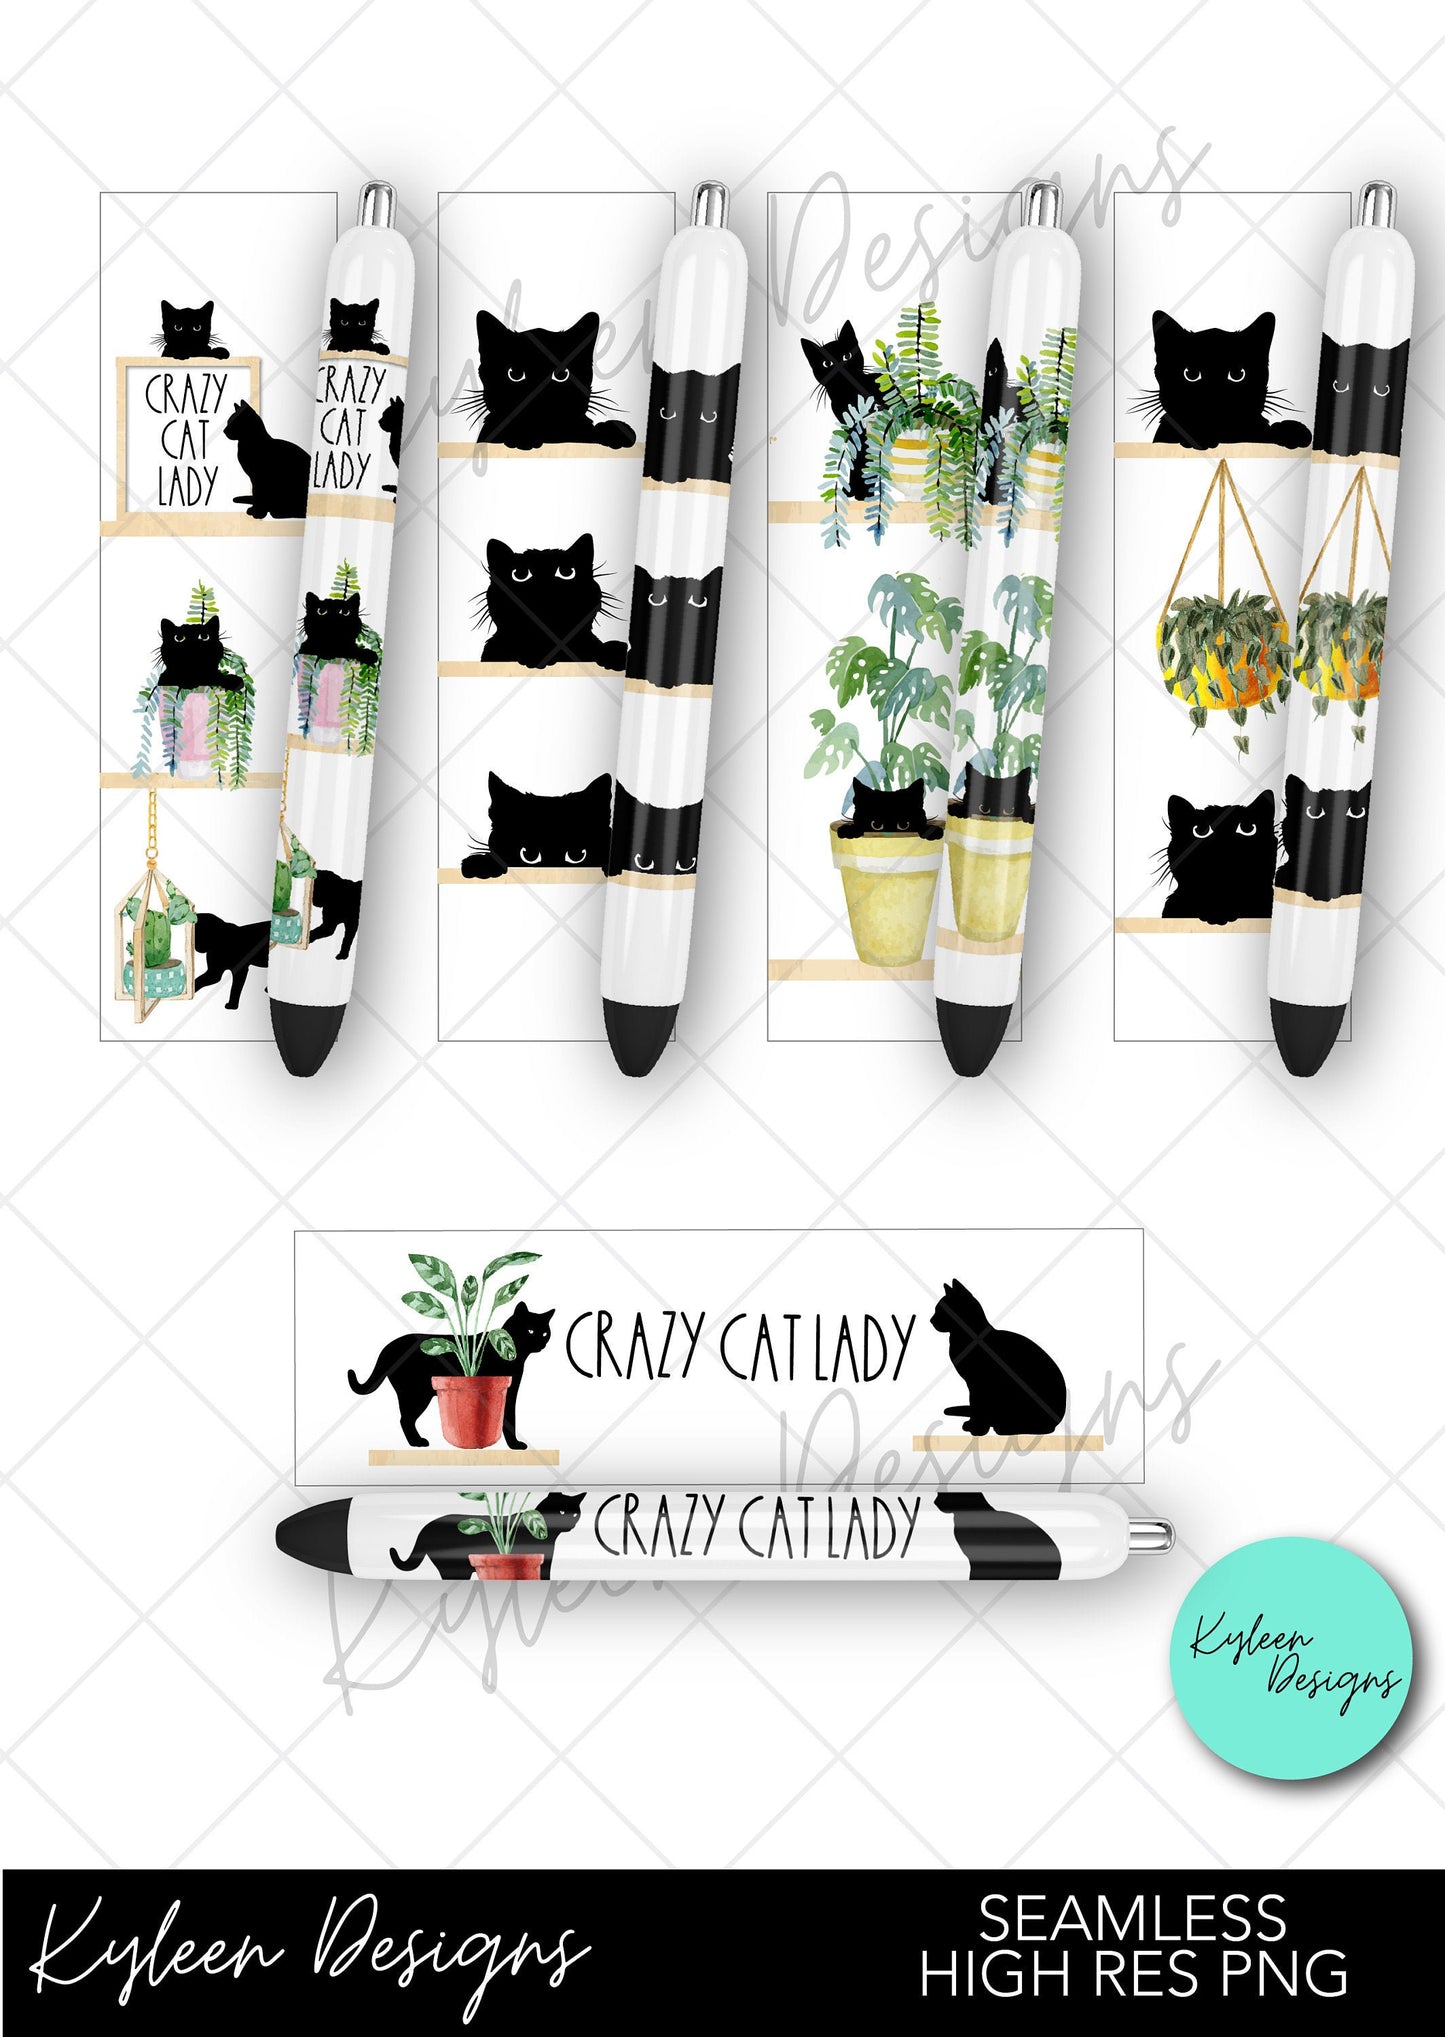 SEAMLESS cat plant lady  pen wraps for waterslide high RES PNG